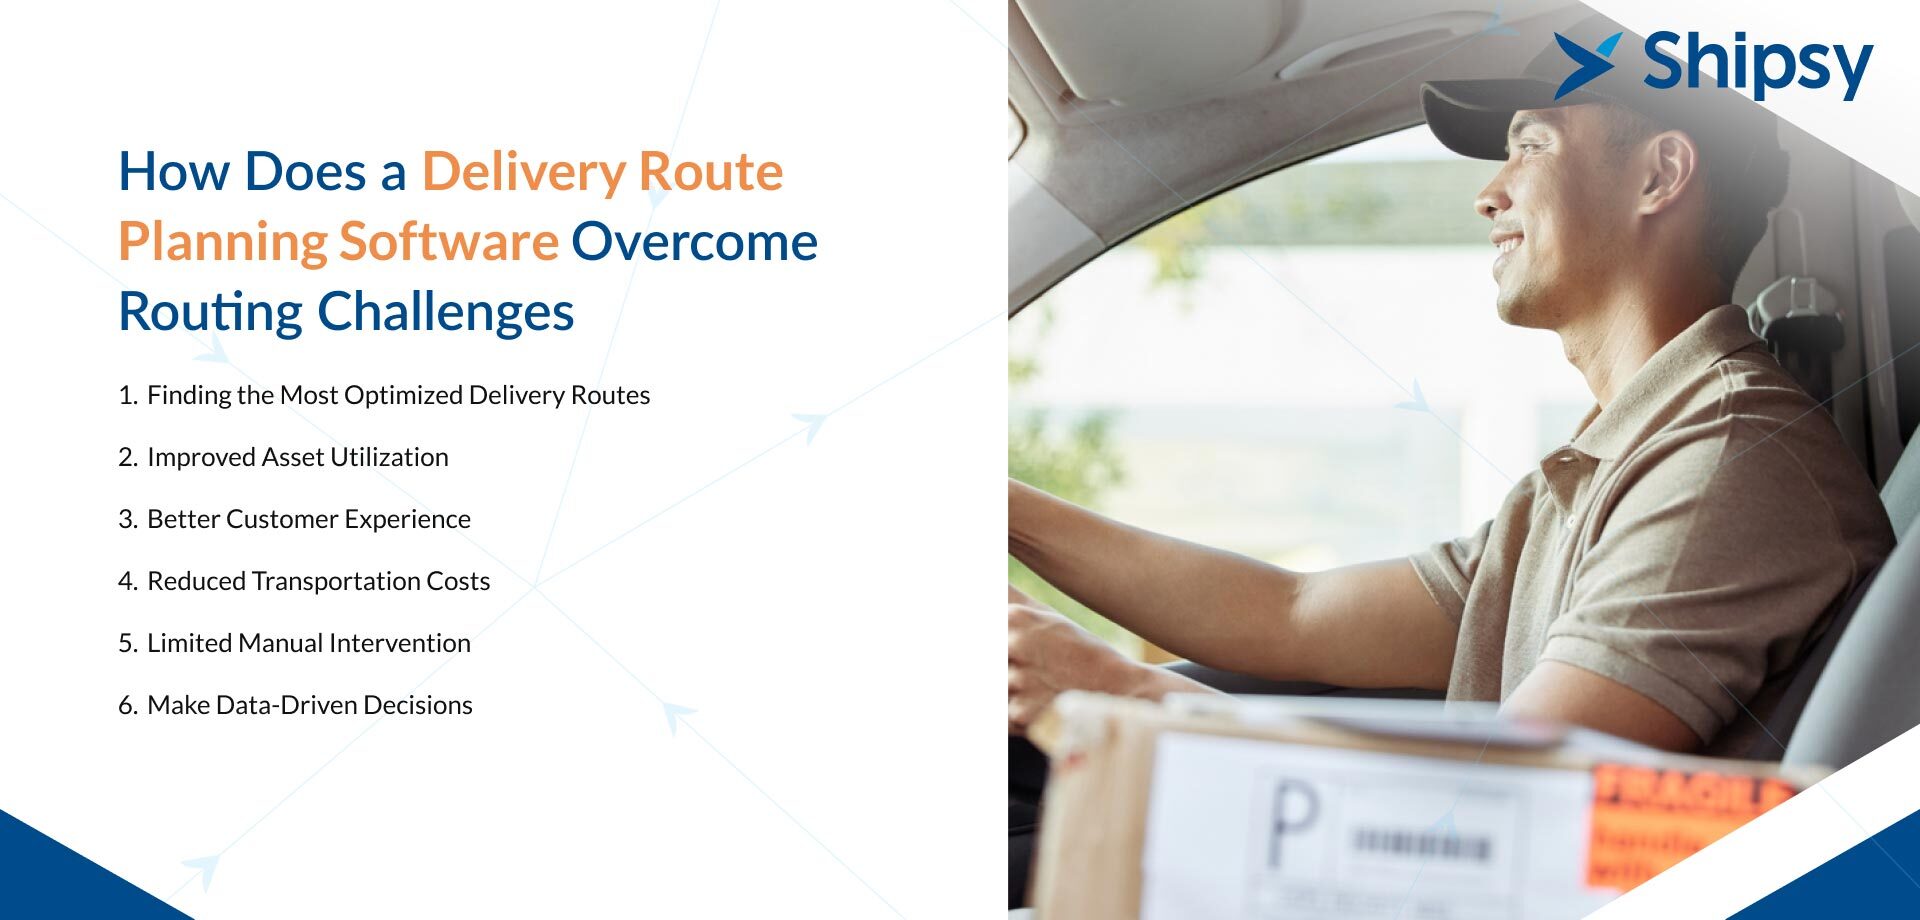 Delivery route planning software benefits
